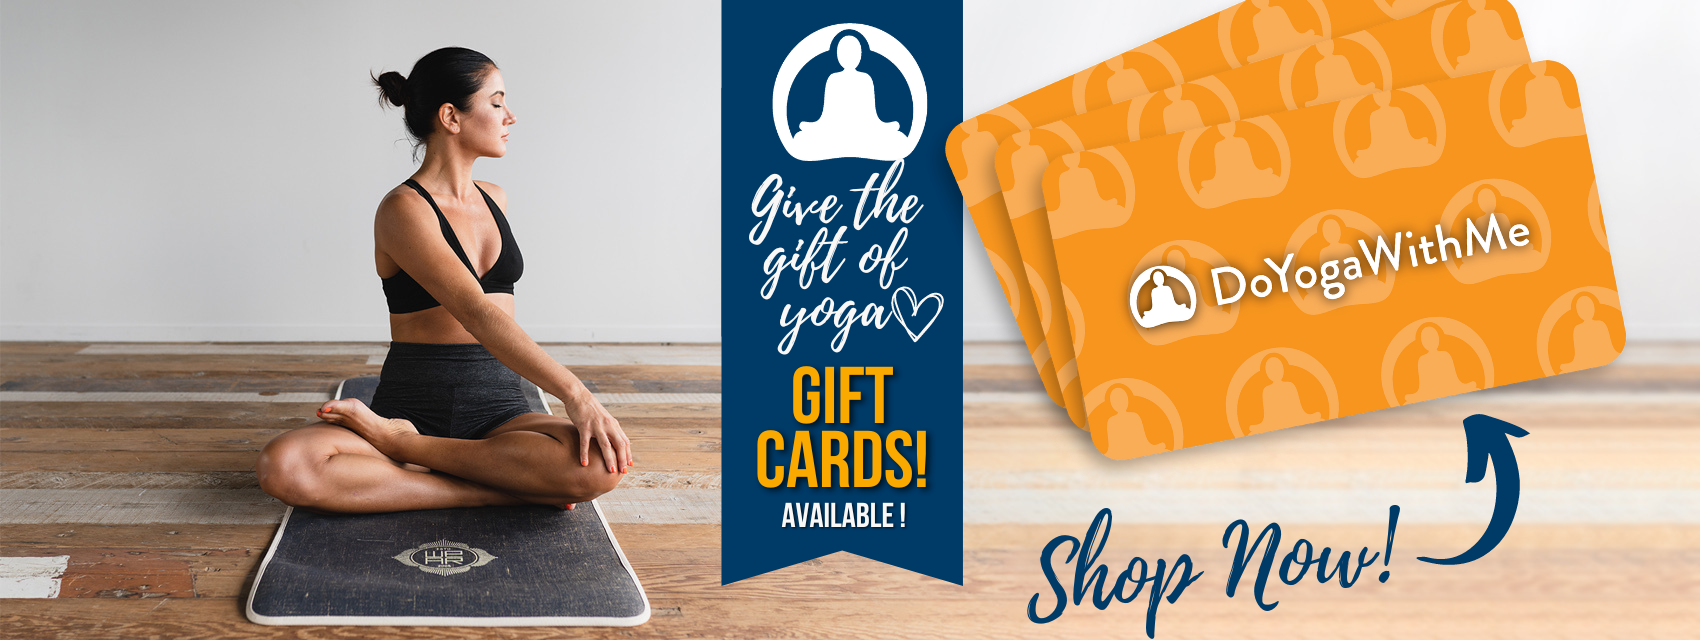 Give the gift of yoga